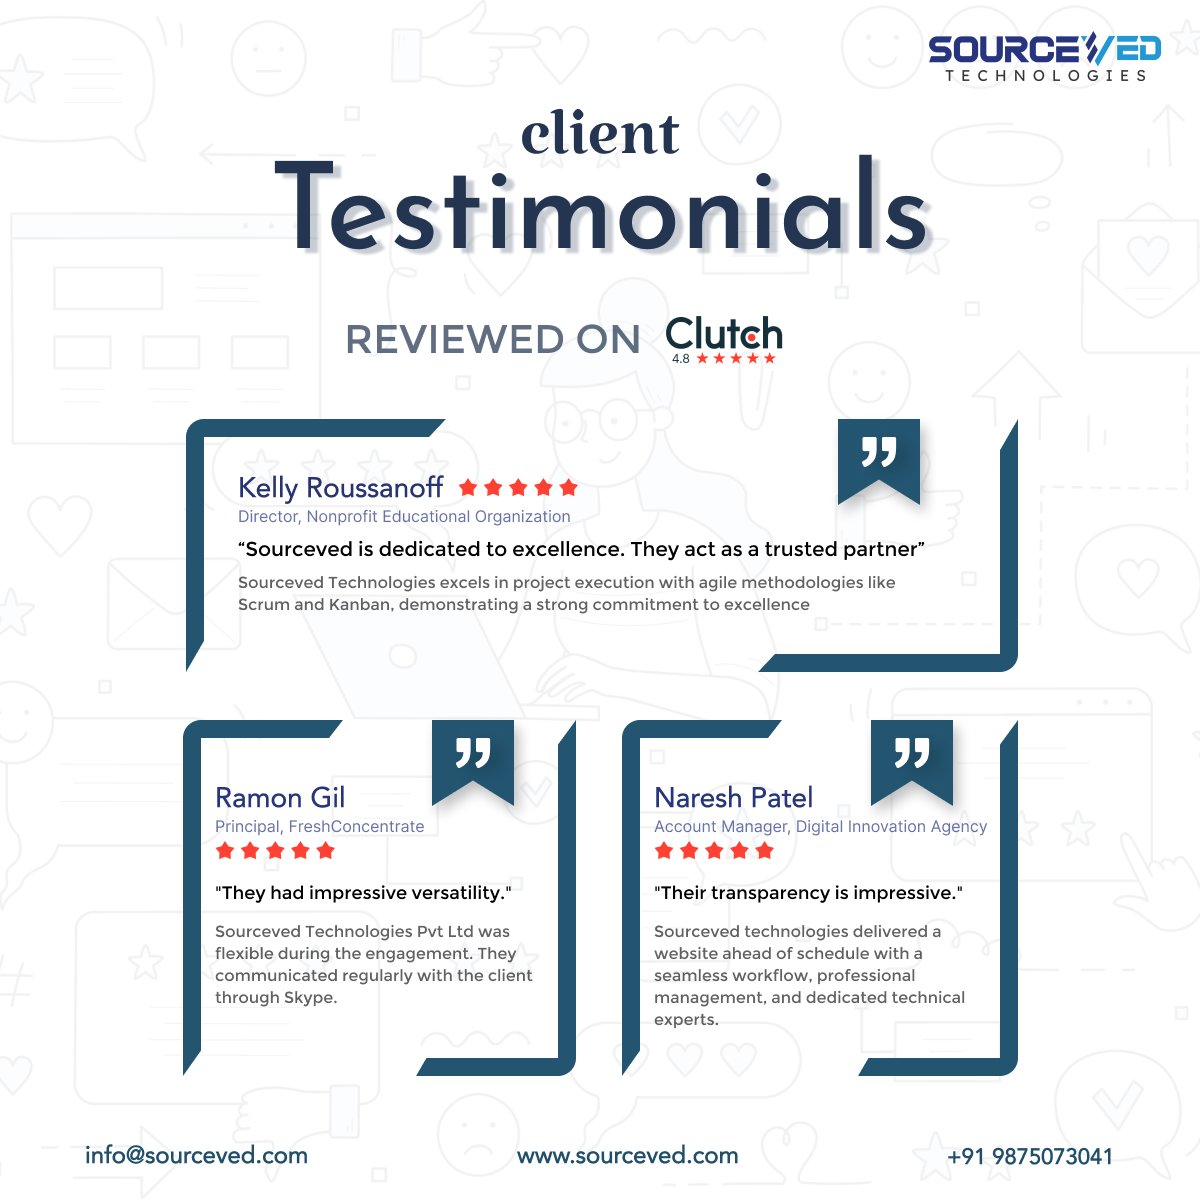 Discover the professional feedback from our valued clients about their experiences with Sourceved 

#ClientTestimonials #ProfessionalExperiences #sourceved #sourcevedtechnologies #testimonial #review #clutch #clutchreviews #clientfeedback #clientreviews #reviews #feedback